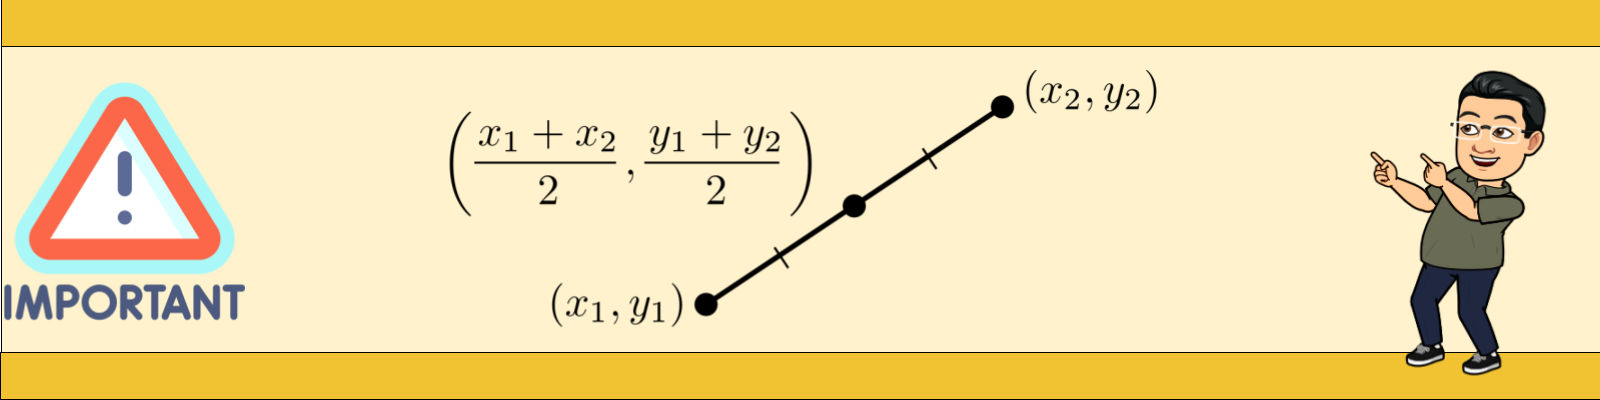 Endpoint of a line segment